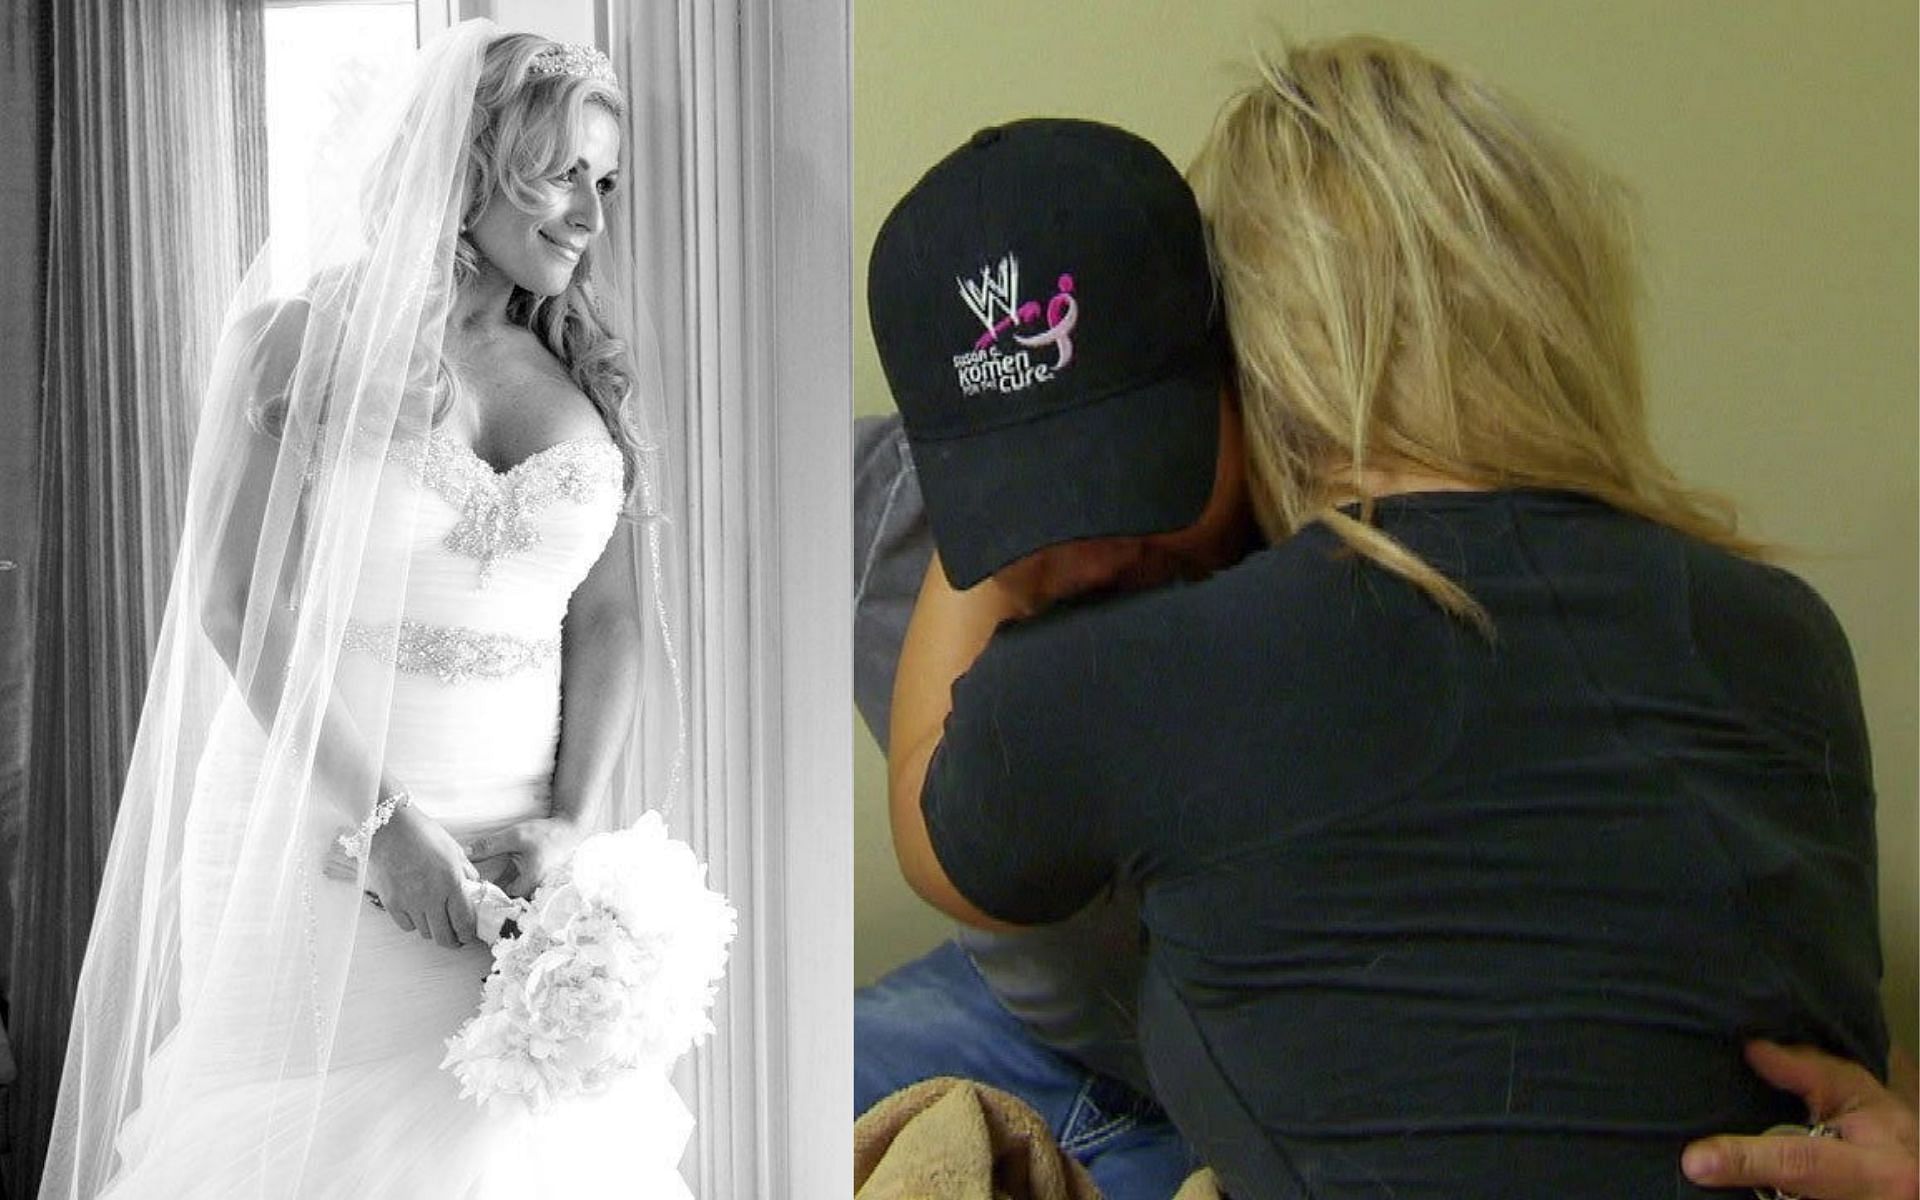 Natalya and Tyson Kidd have been happily married for a long time